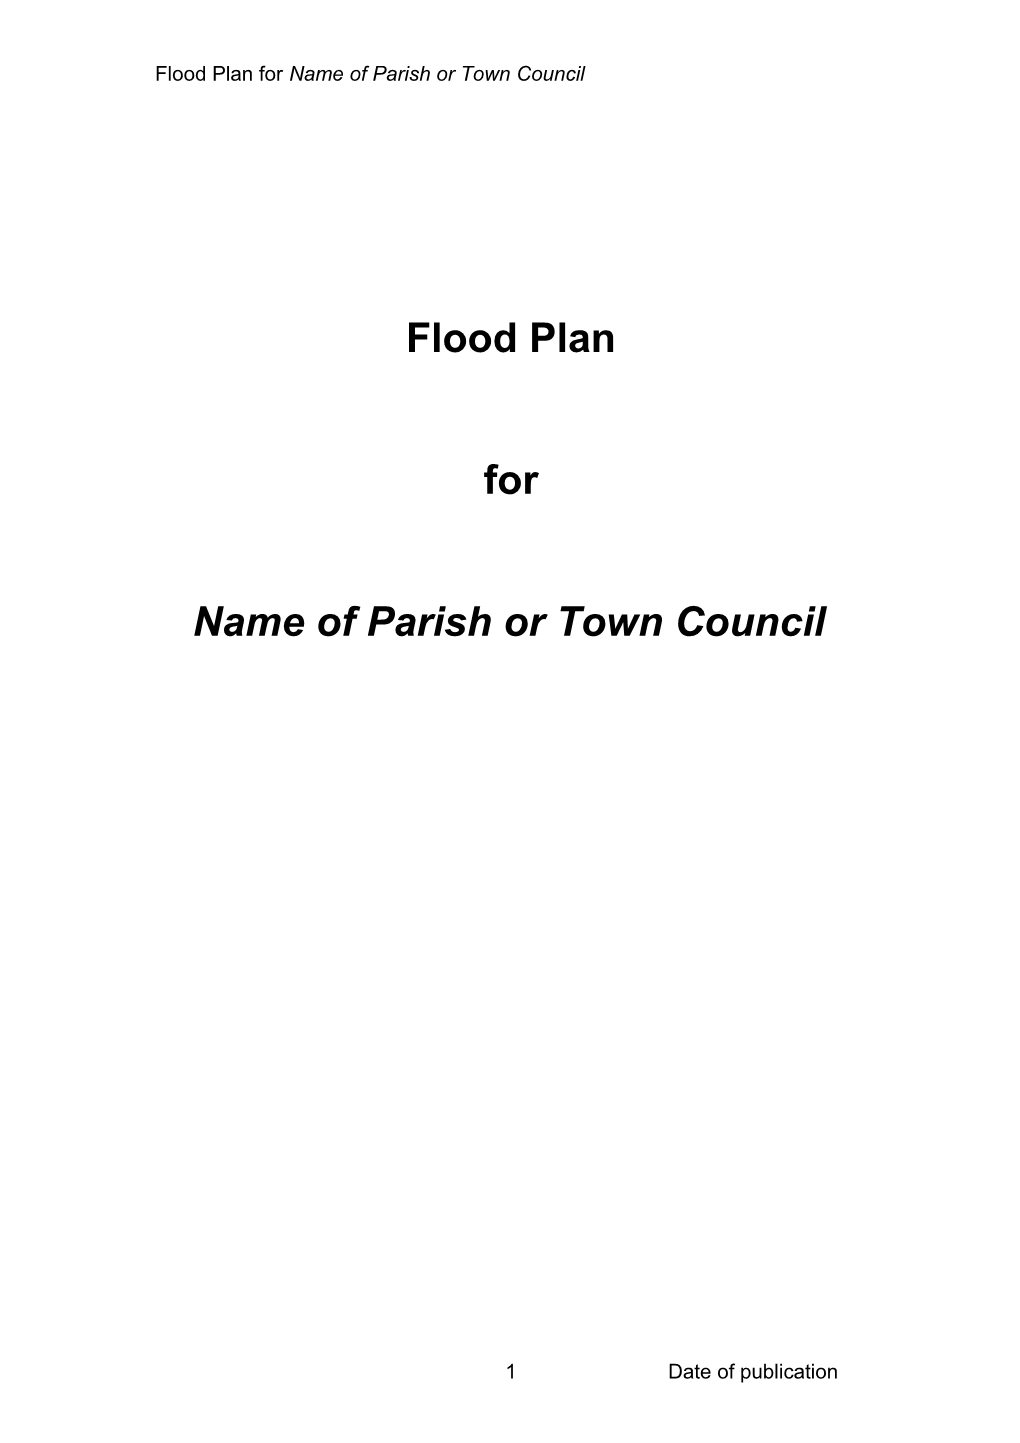 Flood Plan for Name of Parish Or Town Council